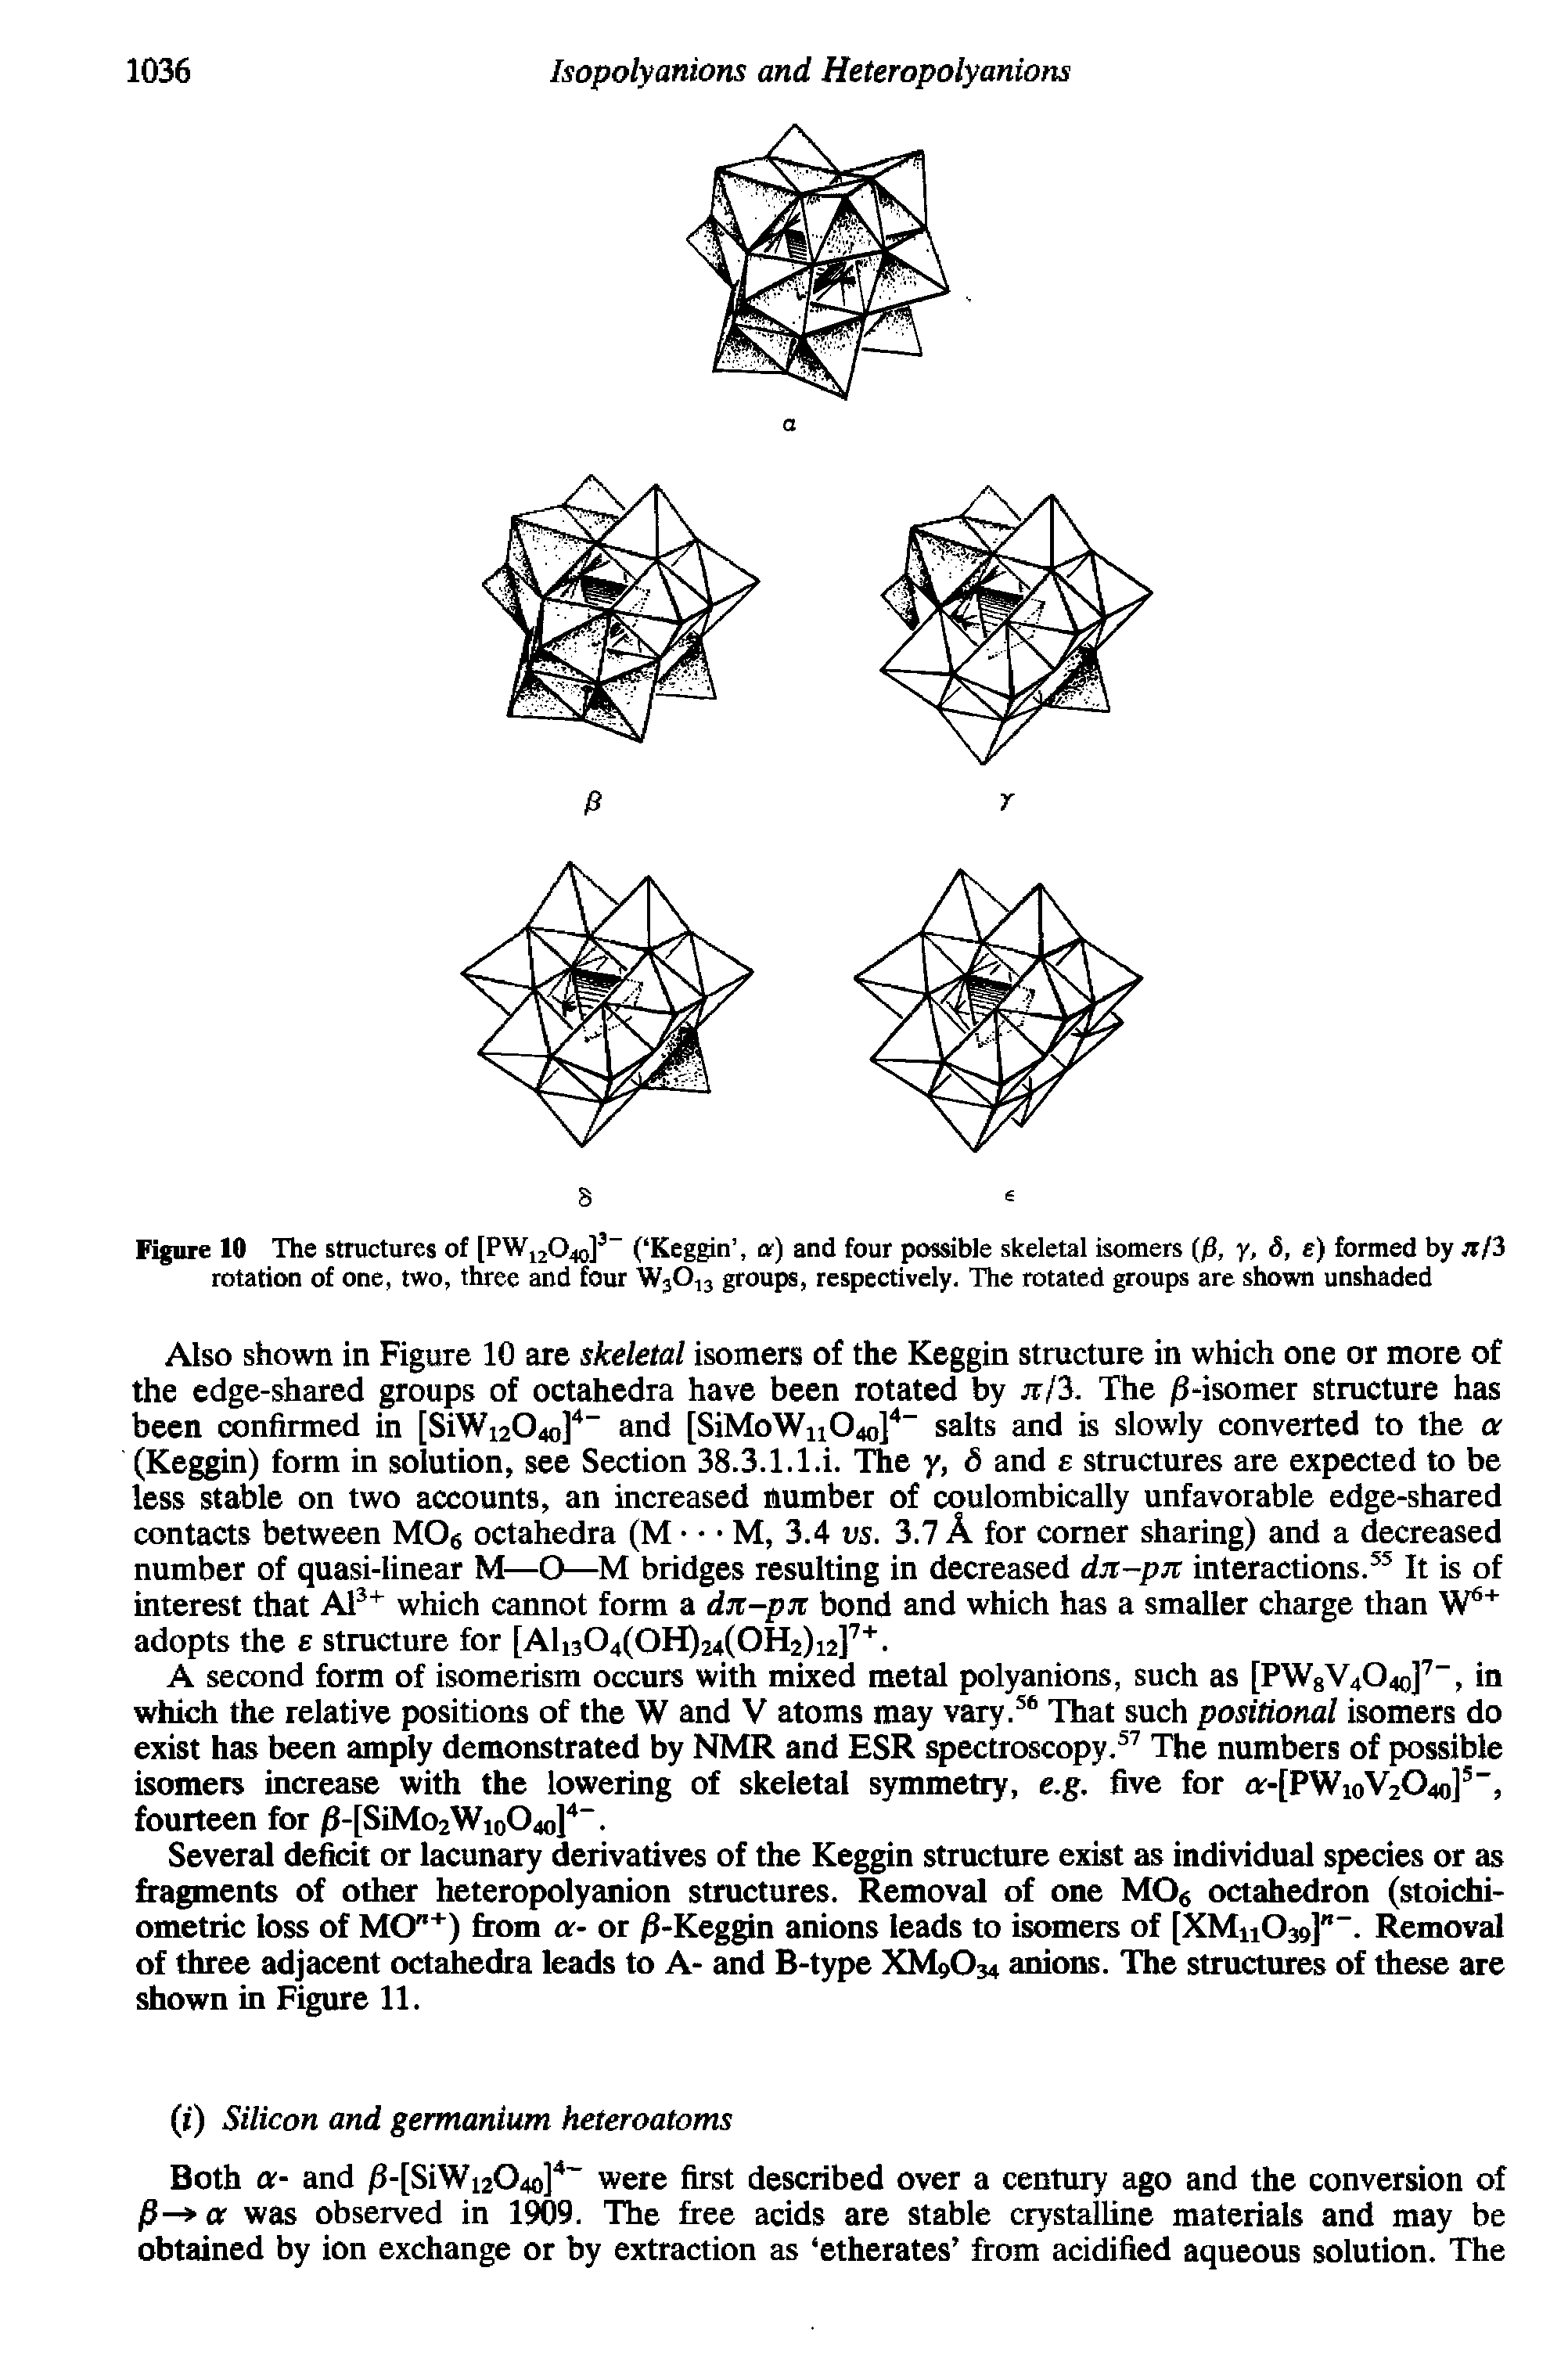 Figure 10 The structures of [PWl20 ]3 ( Keggin , a) and four possible skeletal isomers (fi, y, S, e) formed by n/3 rotation of one, two, three and four W3013 groups, respectively. The rotated groups are shown unshaded...